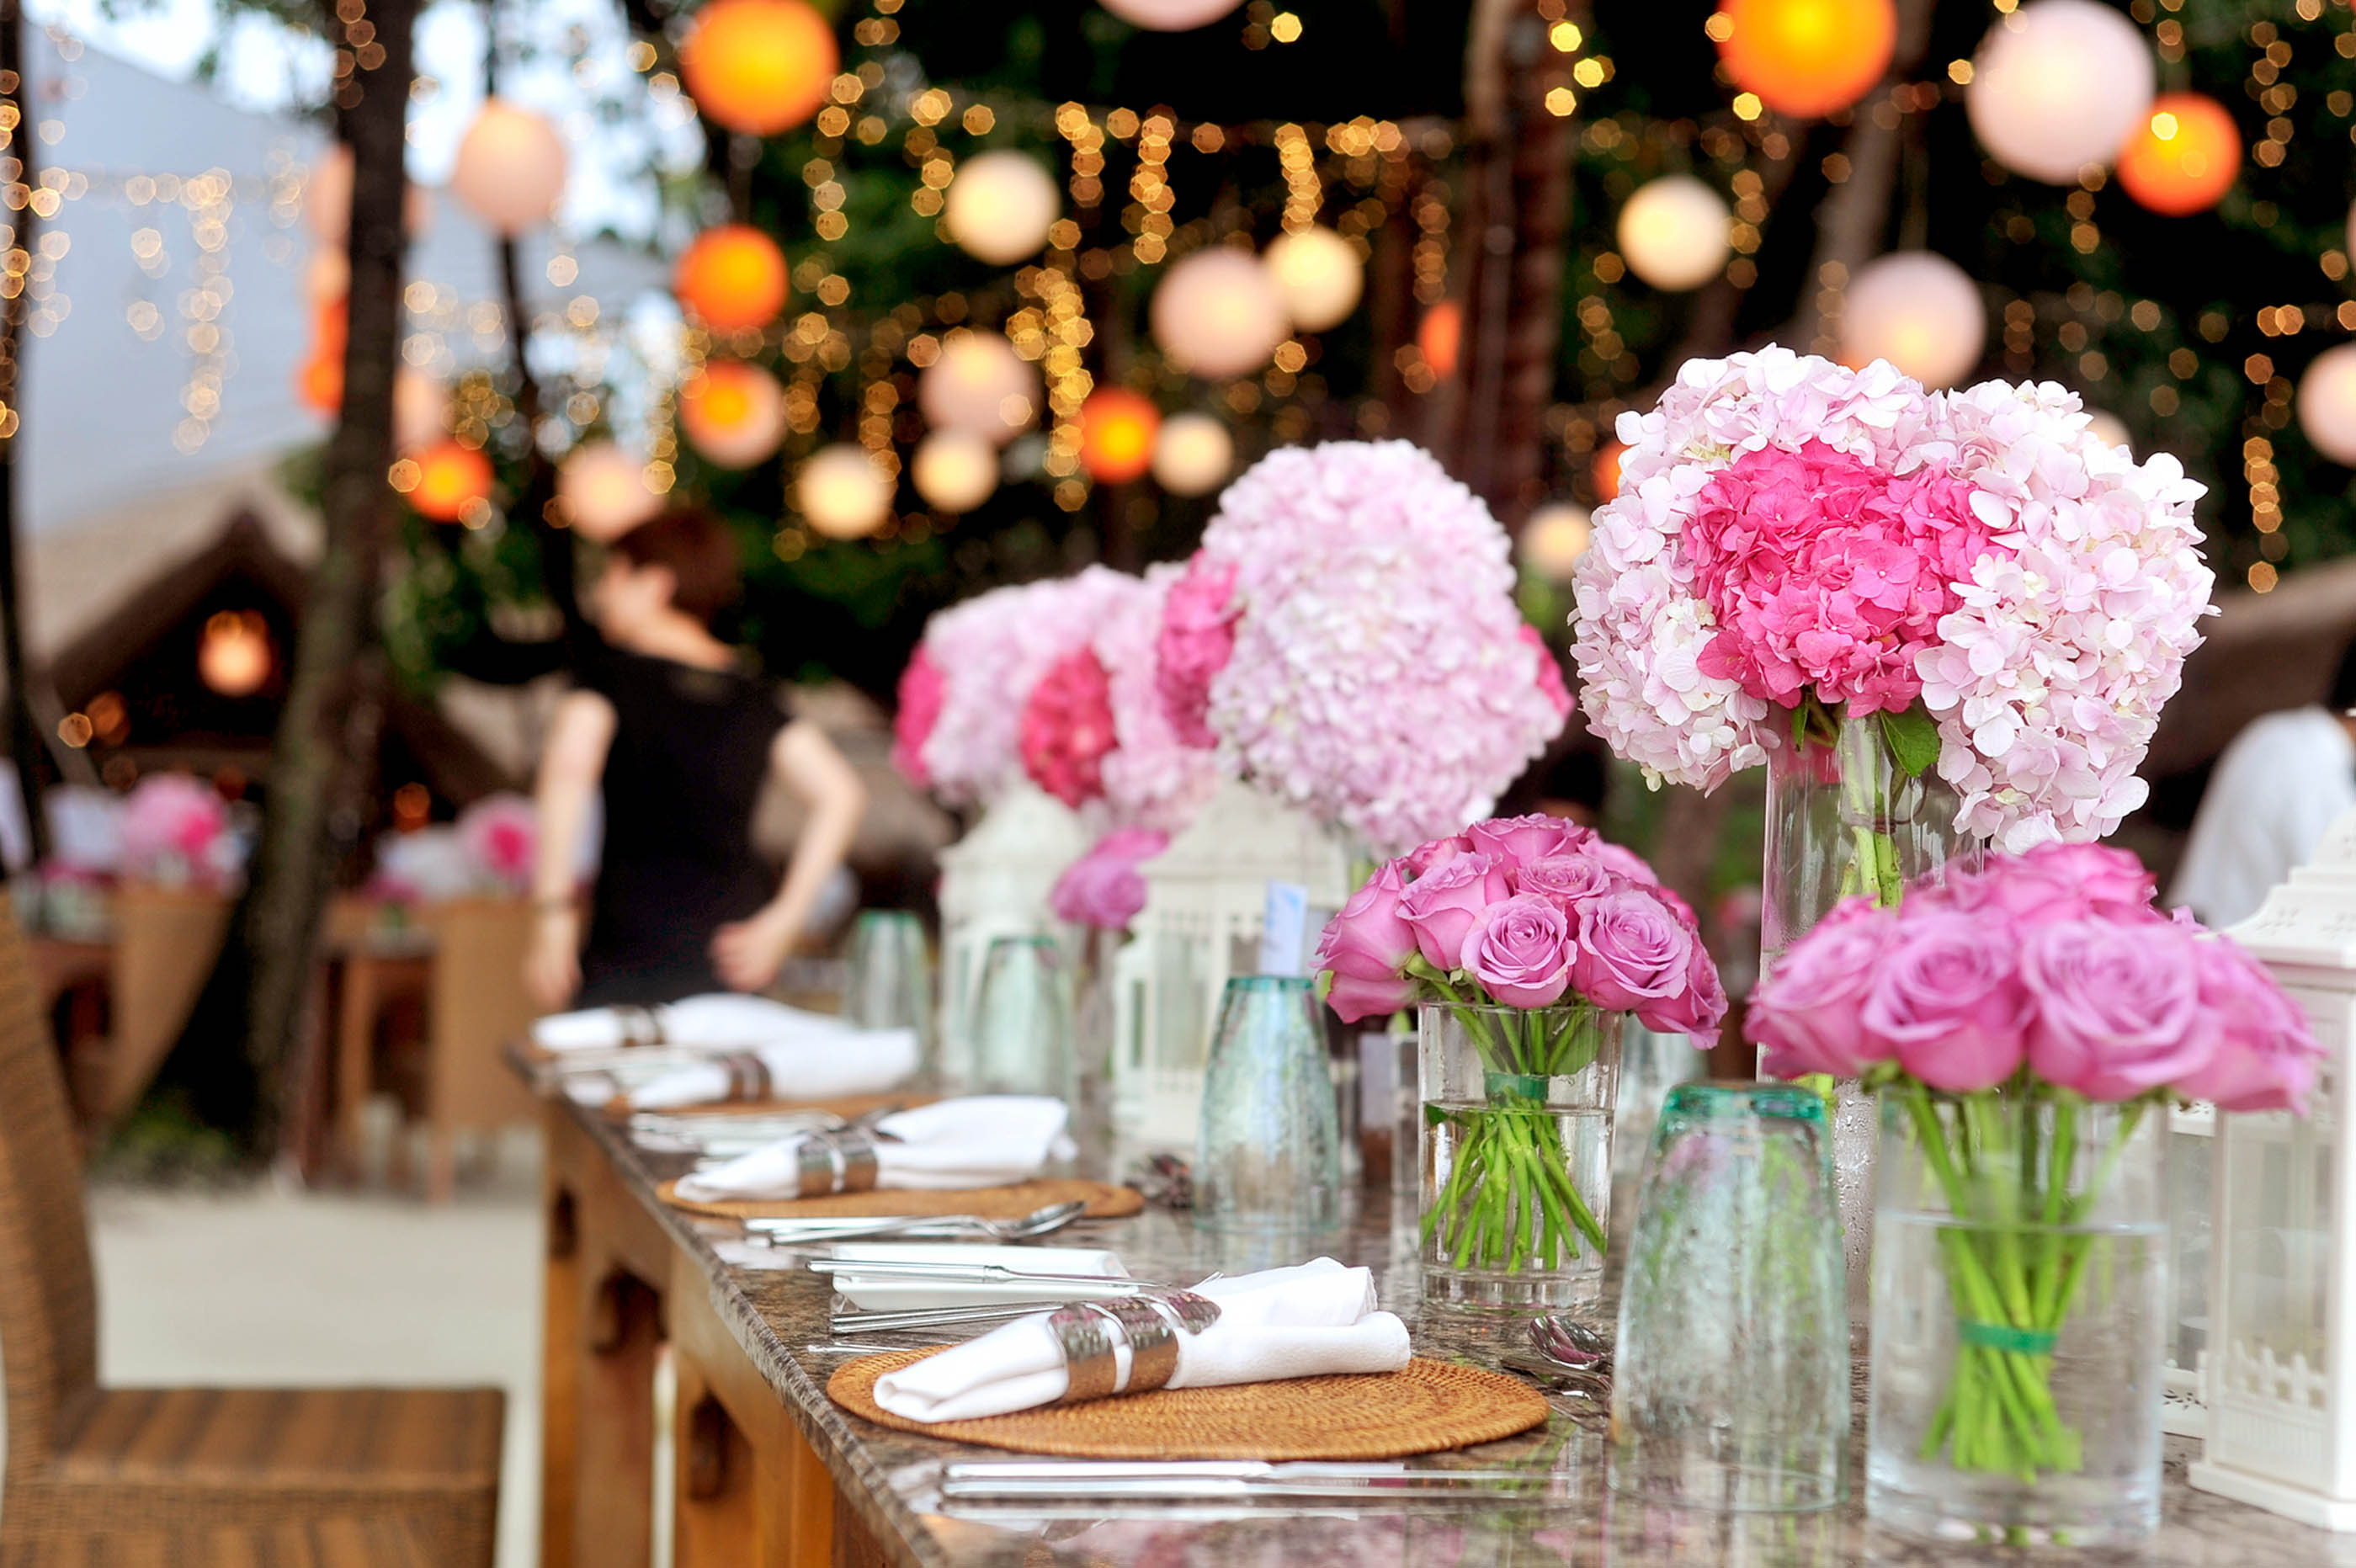 Table decorated with flowers